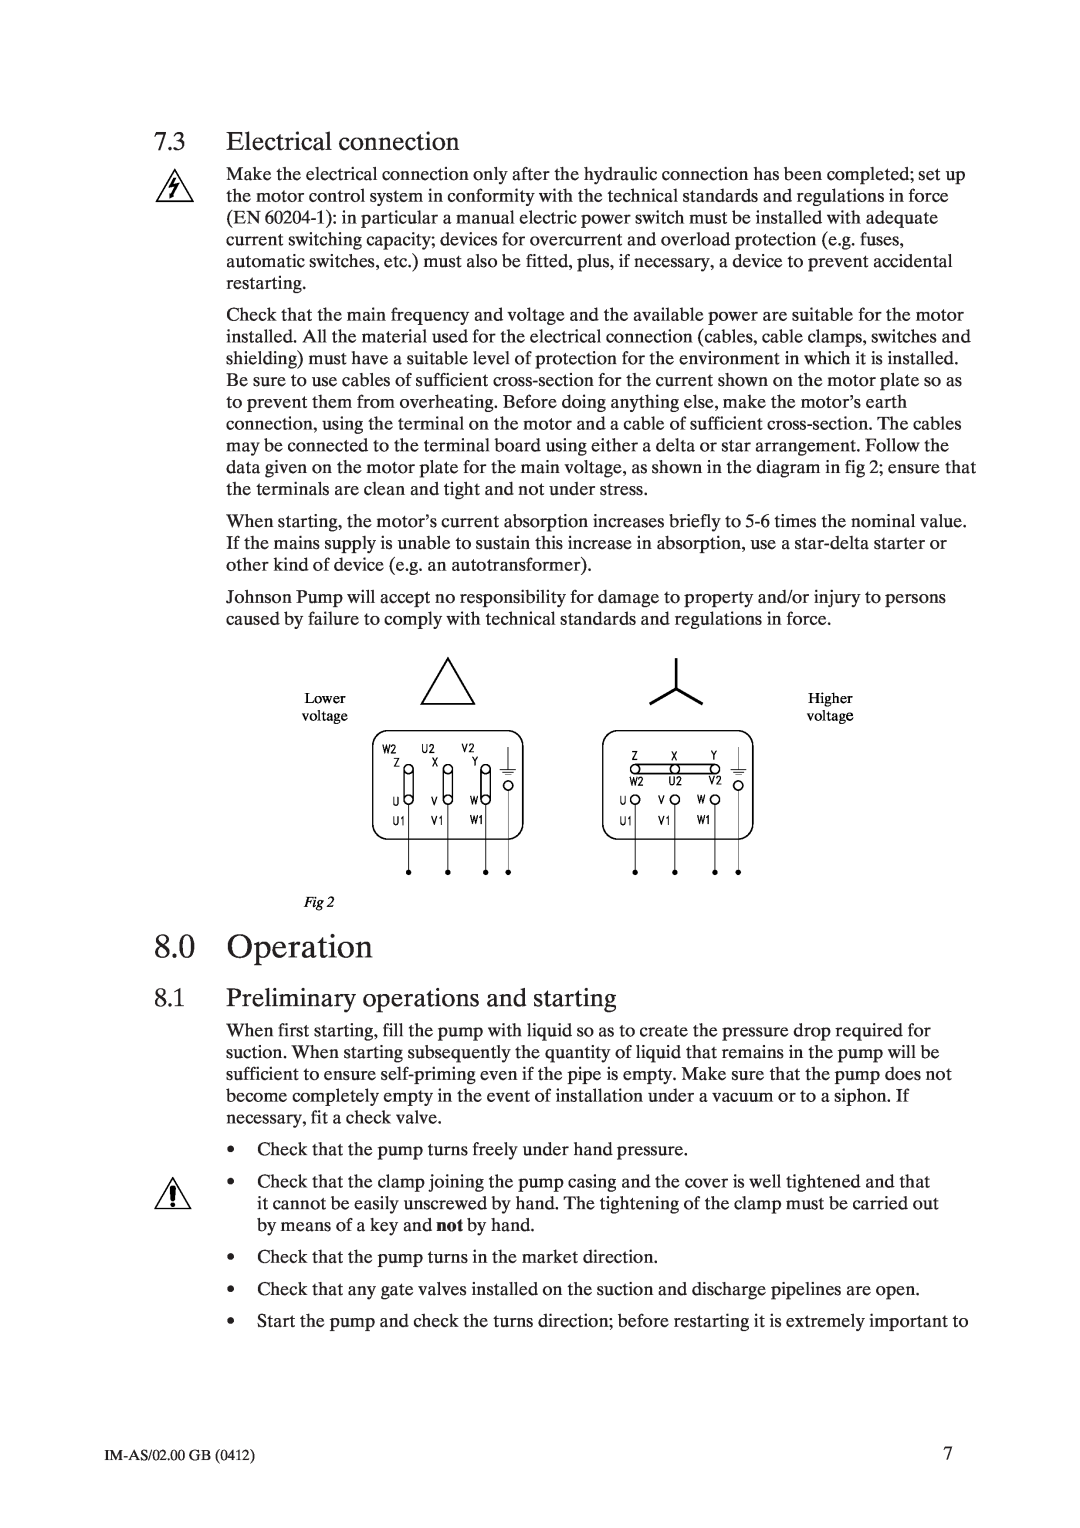 Johnson Controls AS instruction manual 8.0Operation, 7.3Electrical connection, 8.1Preliminary operations and starting 